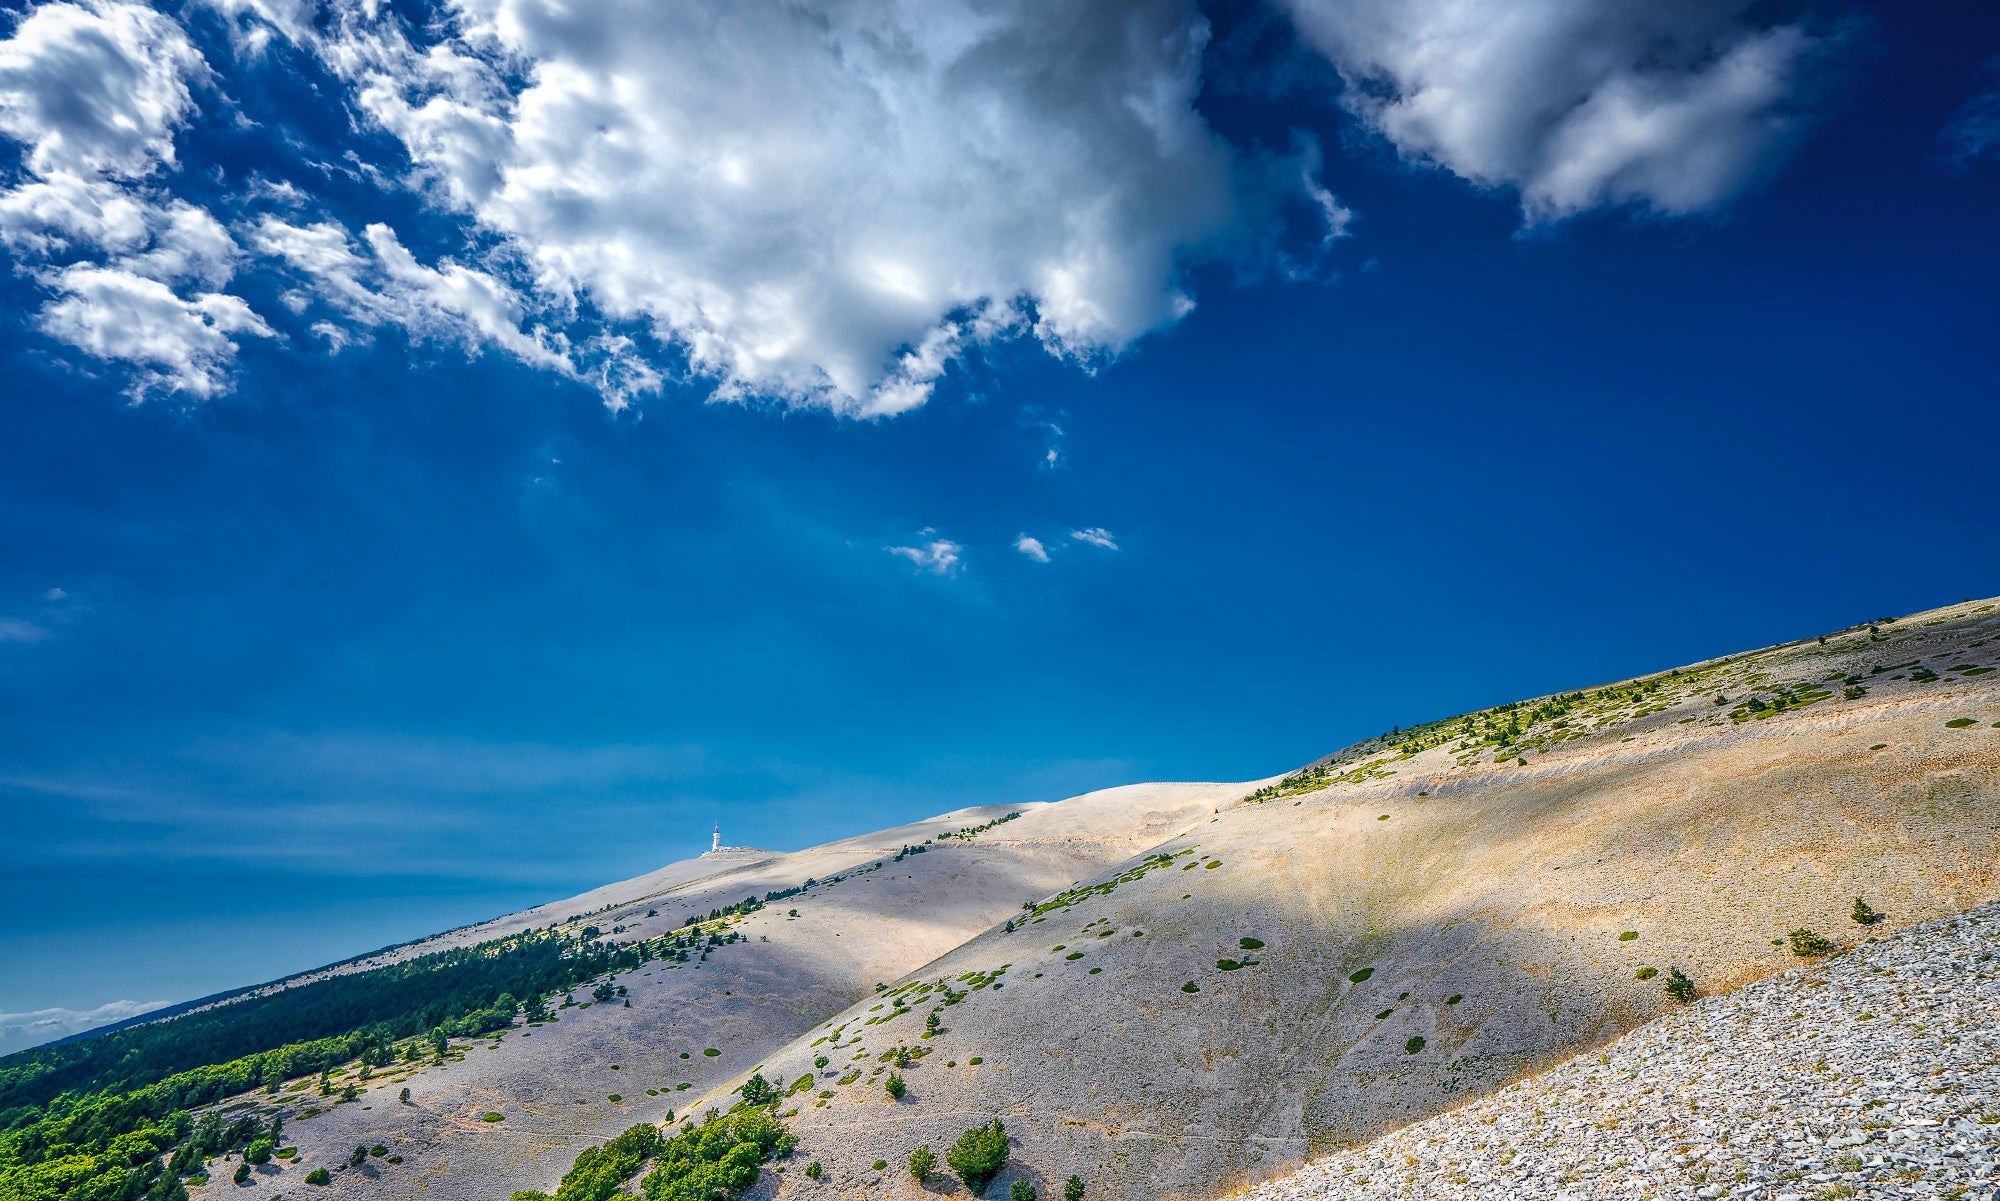 Mont Ventoux cycling photography prints of the great cycling climbs by davidt